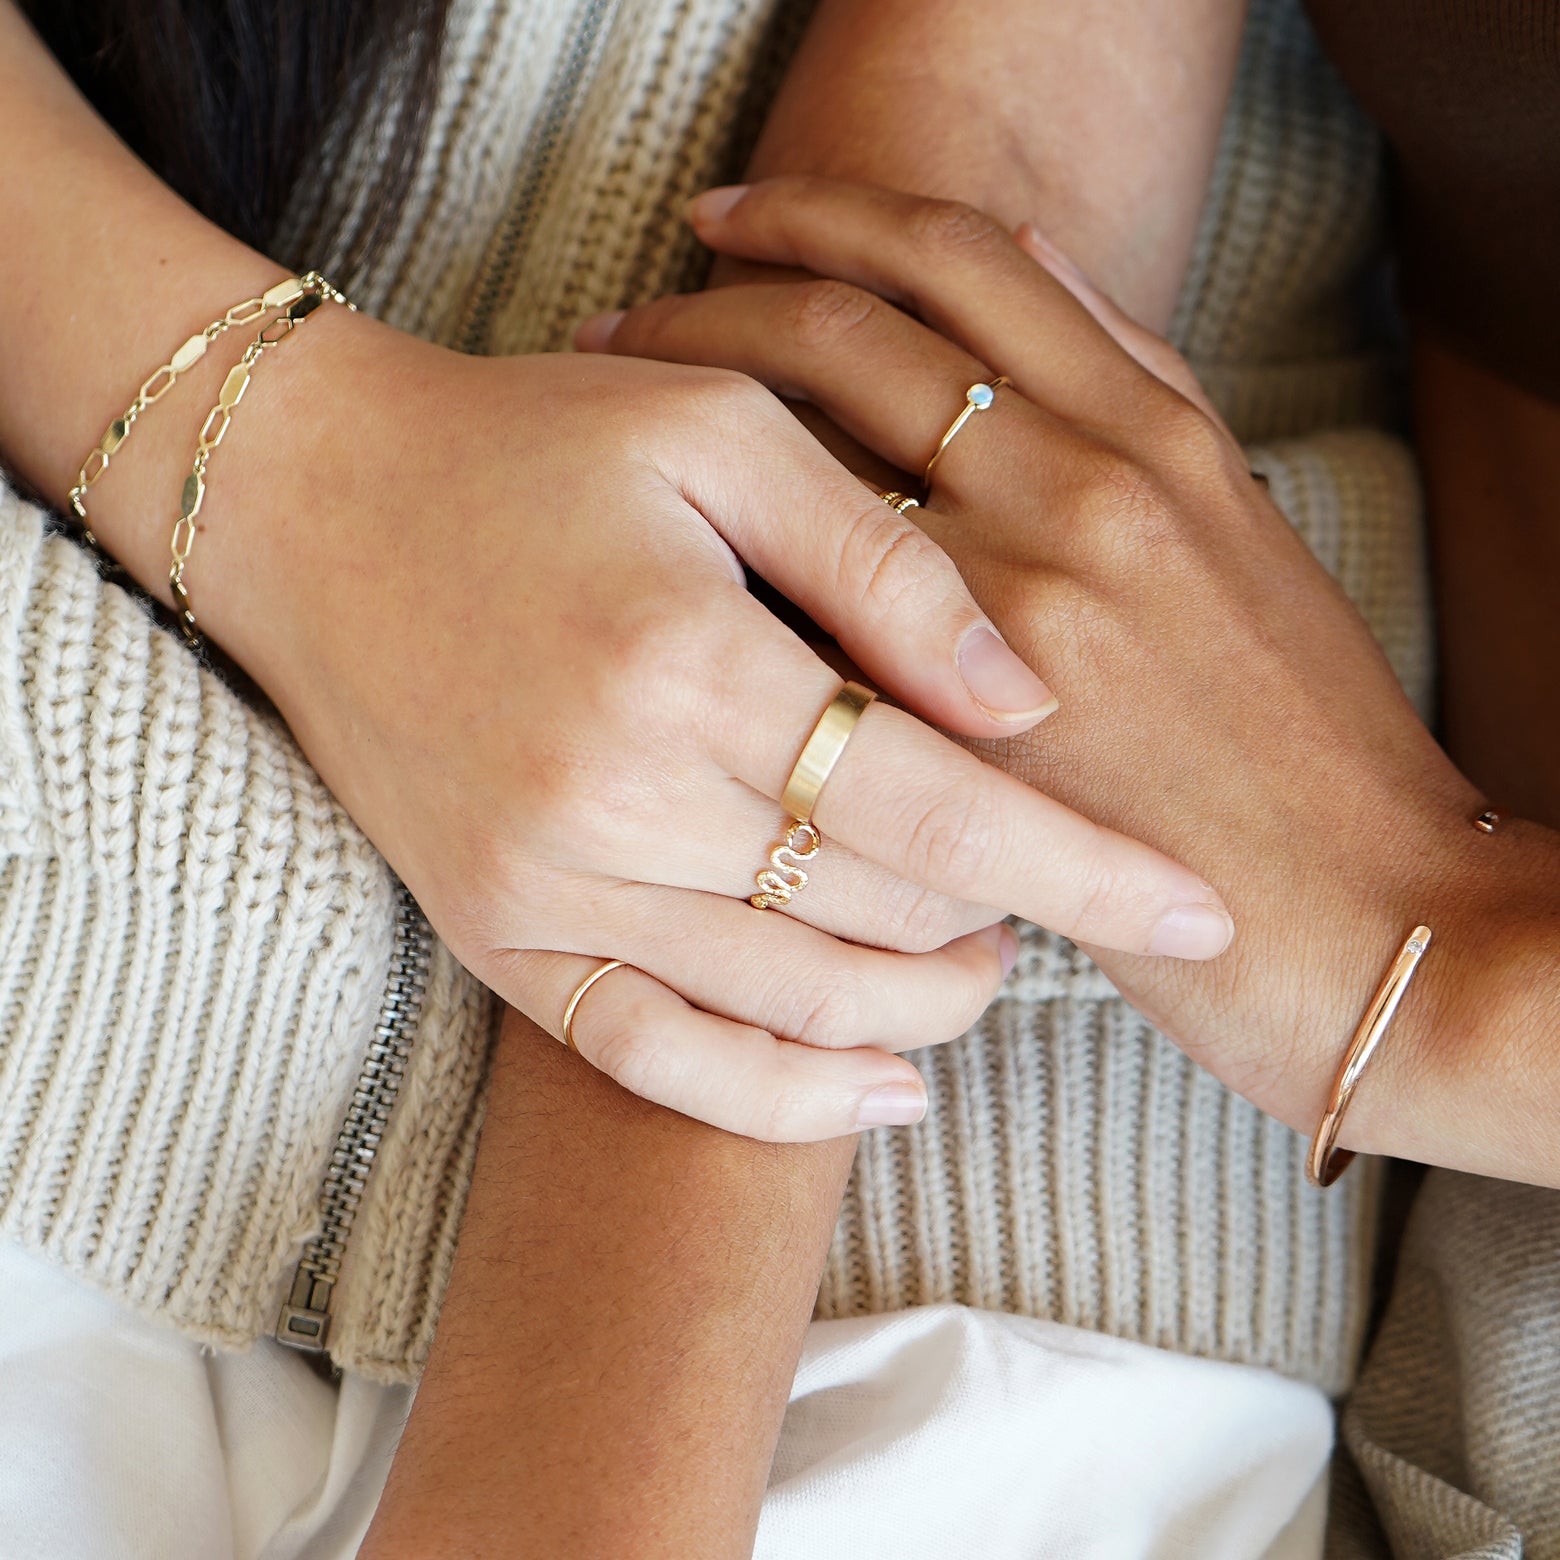 Two models touching each others hands over one model's arm while wearing various Automic Gold jewelry